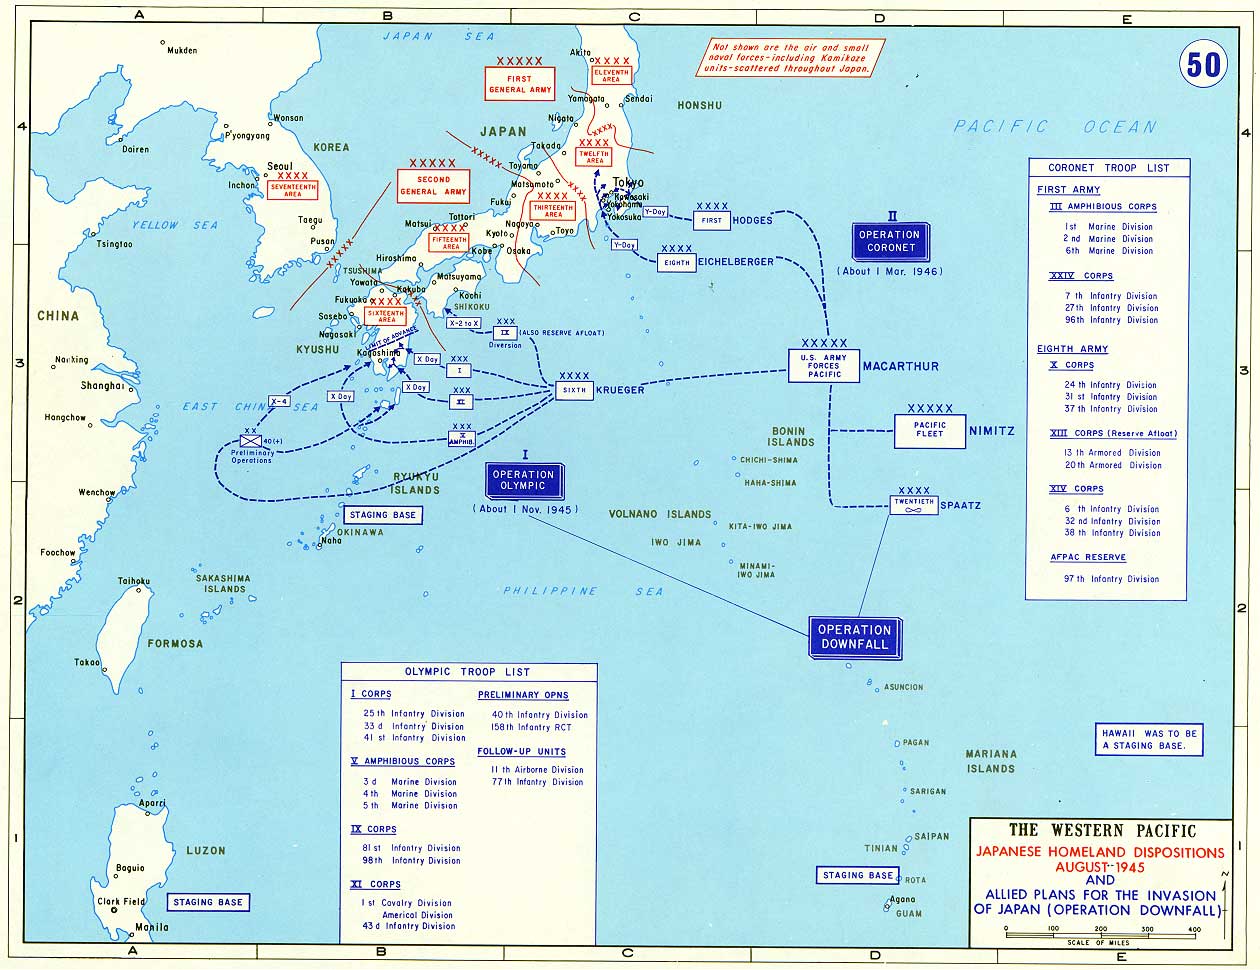 Allied Plans for the Invasion of Japan, August 1945.